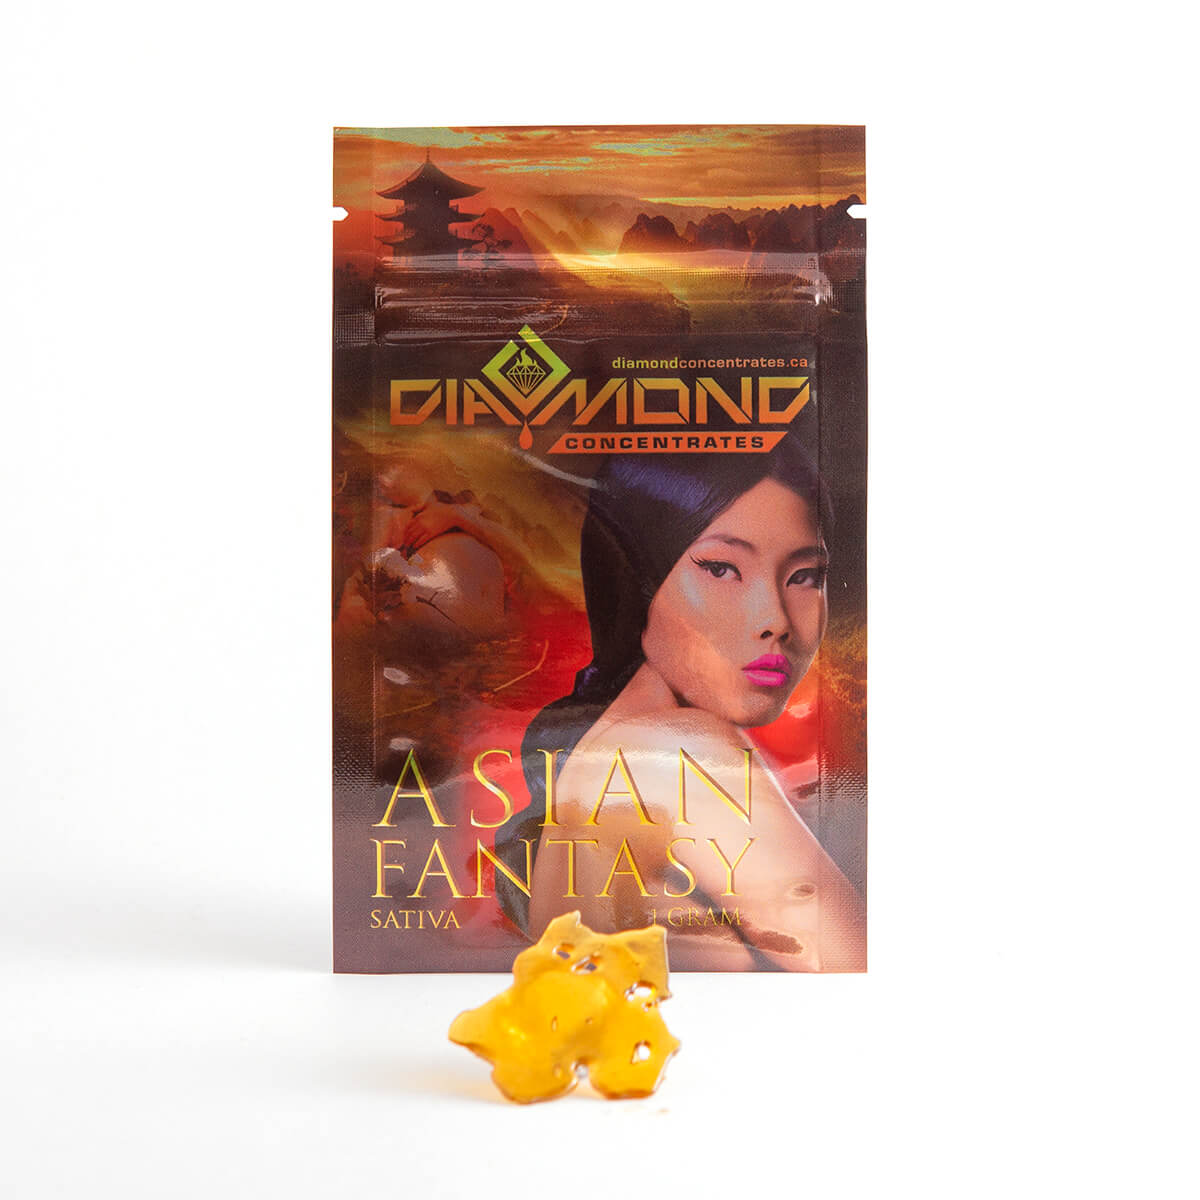 Asian Fantasy Shatter by Diamond Concentrates